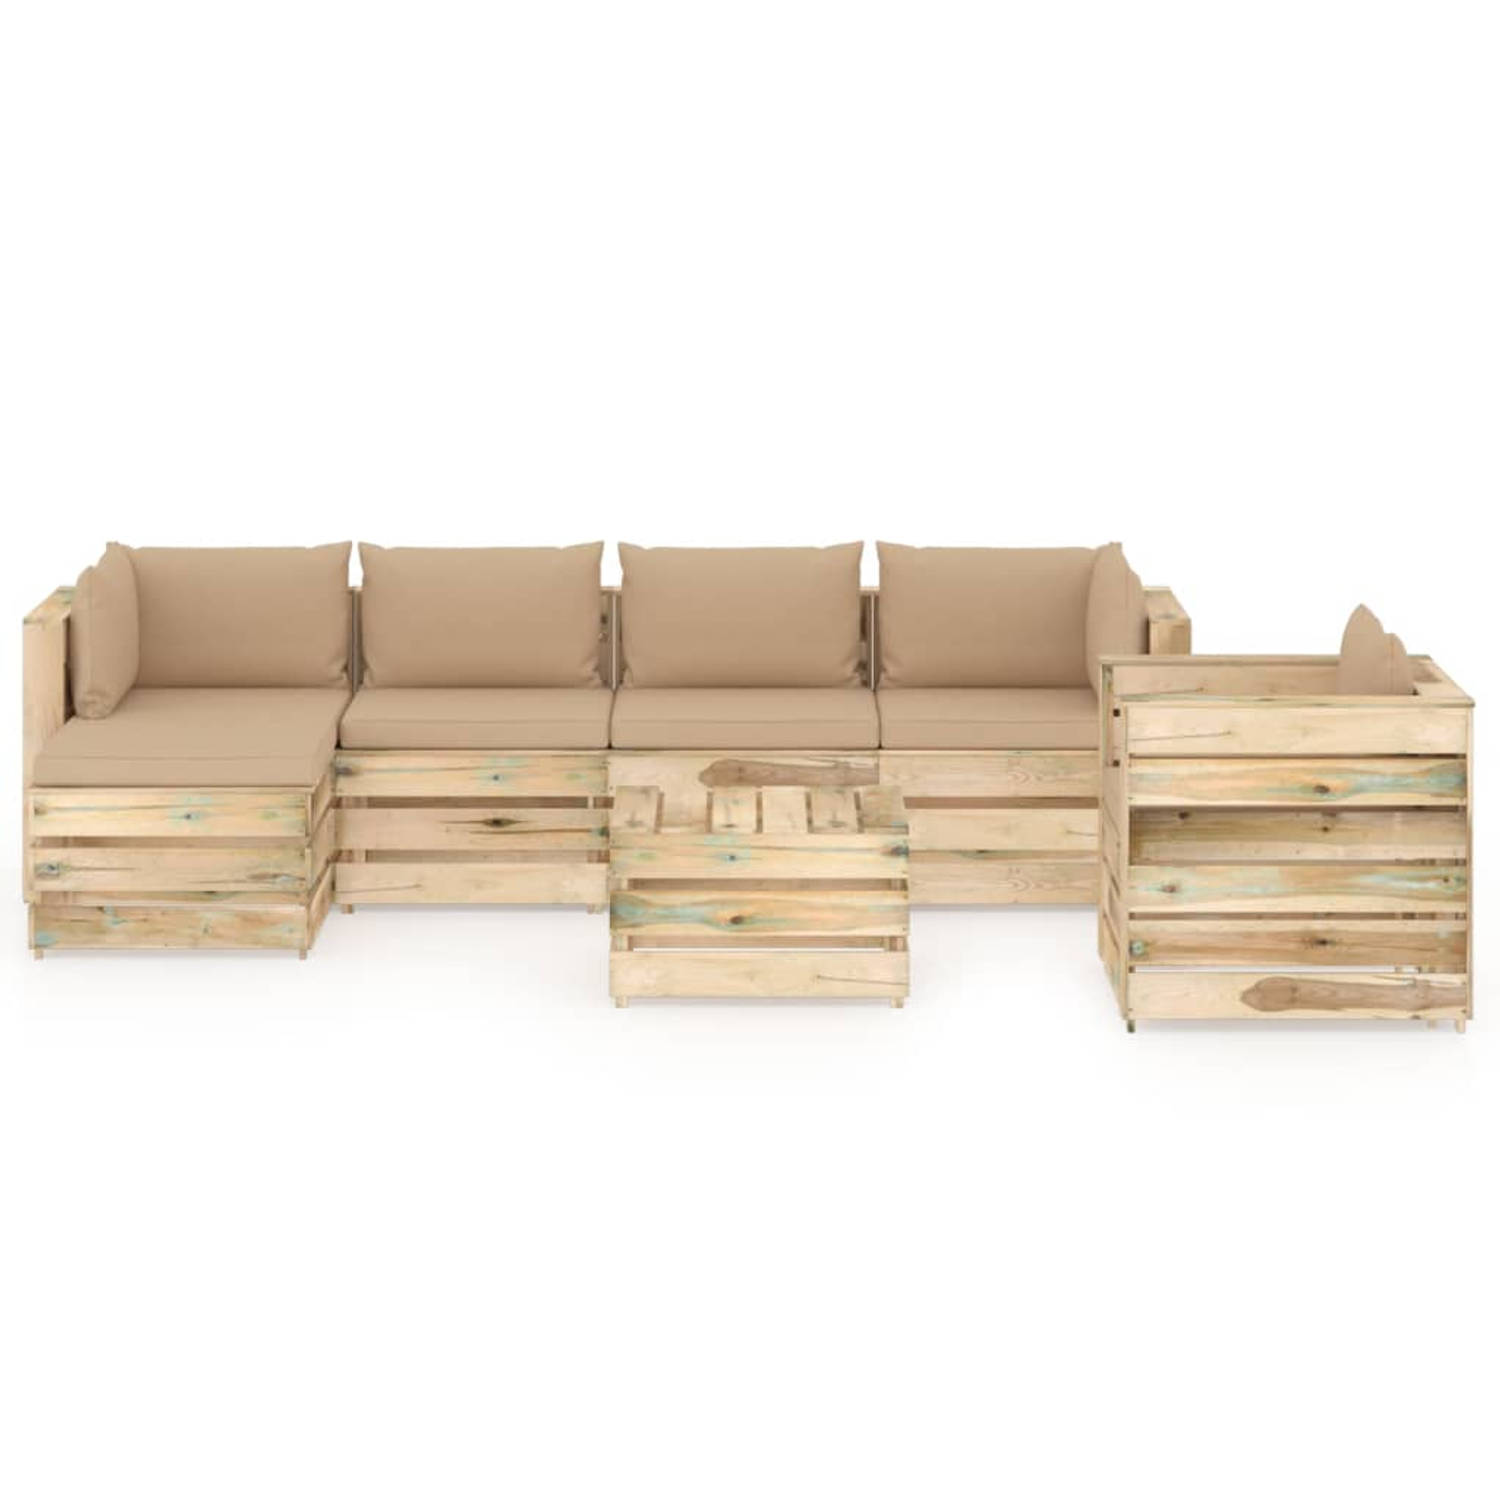 The Living Store Loungeset Pallet - 6-delig - Grenenhout - Beige kussens - 69x70x66 cm - 100% polyester stof